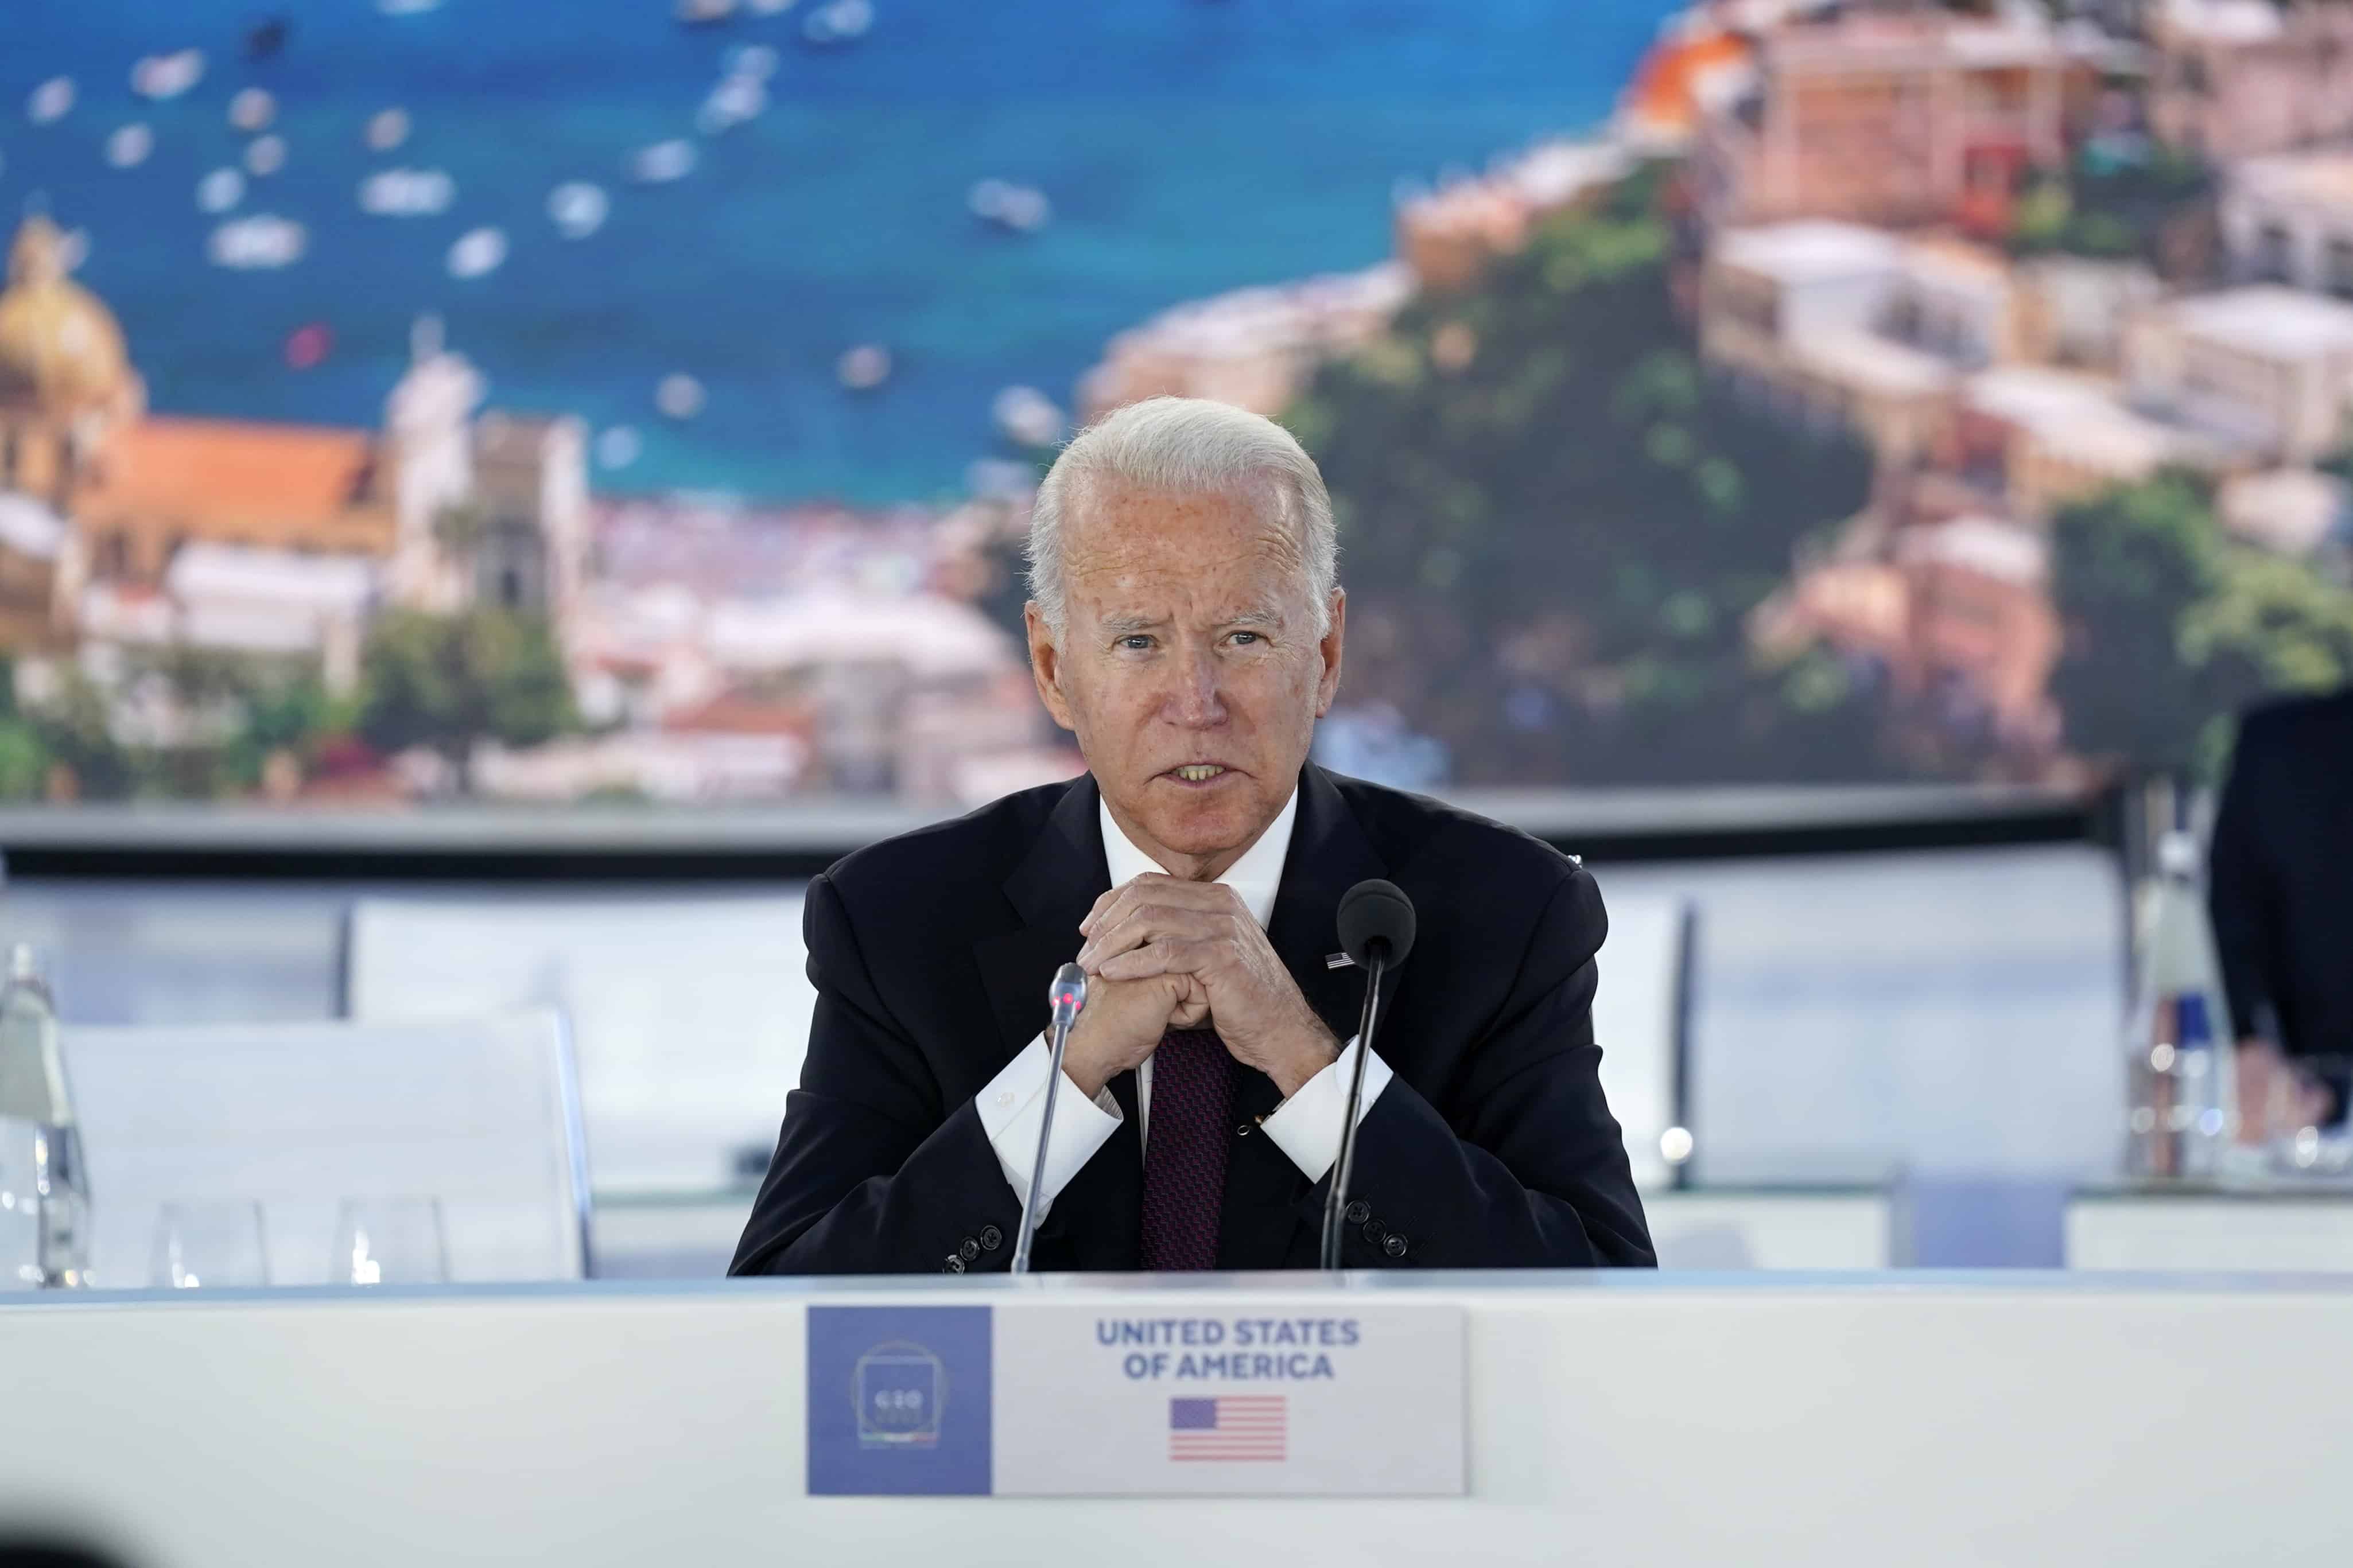 Biden Winds Up G-20 Summit With Dings at Russia, China